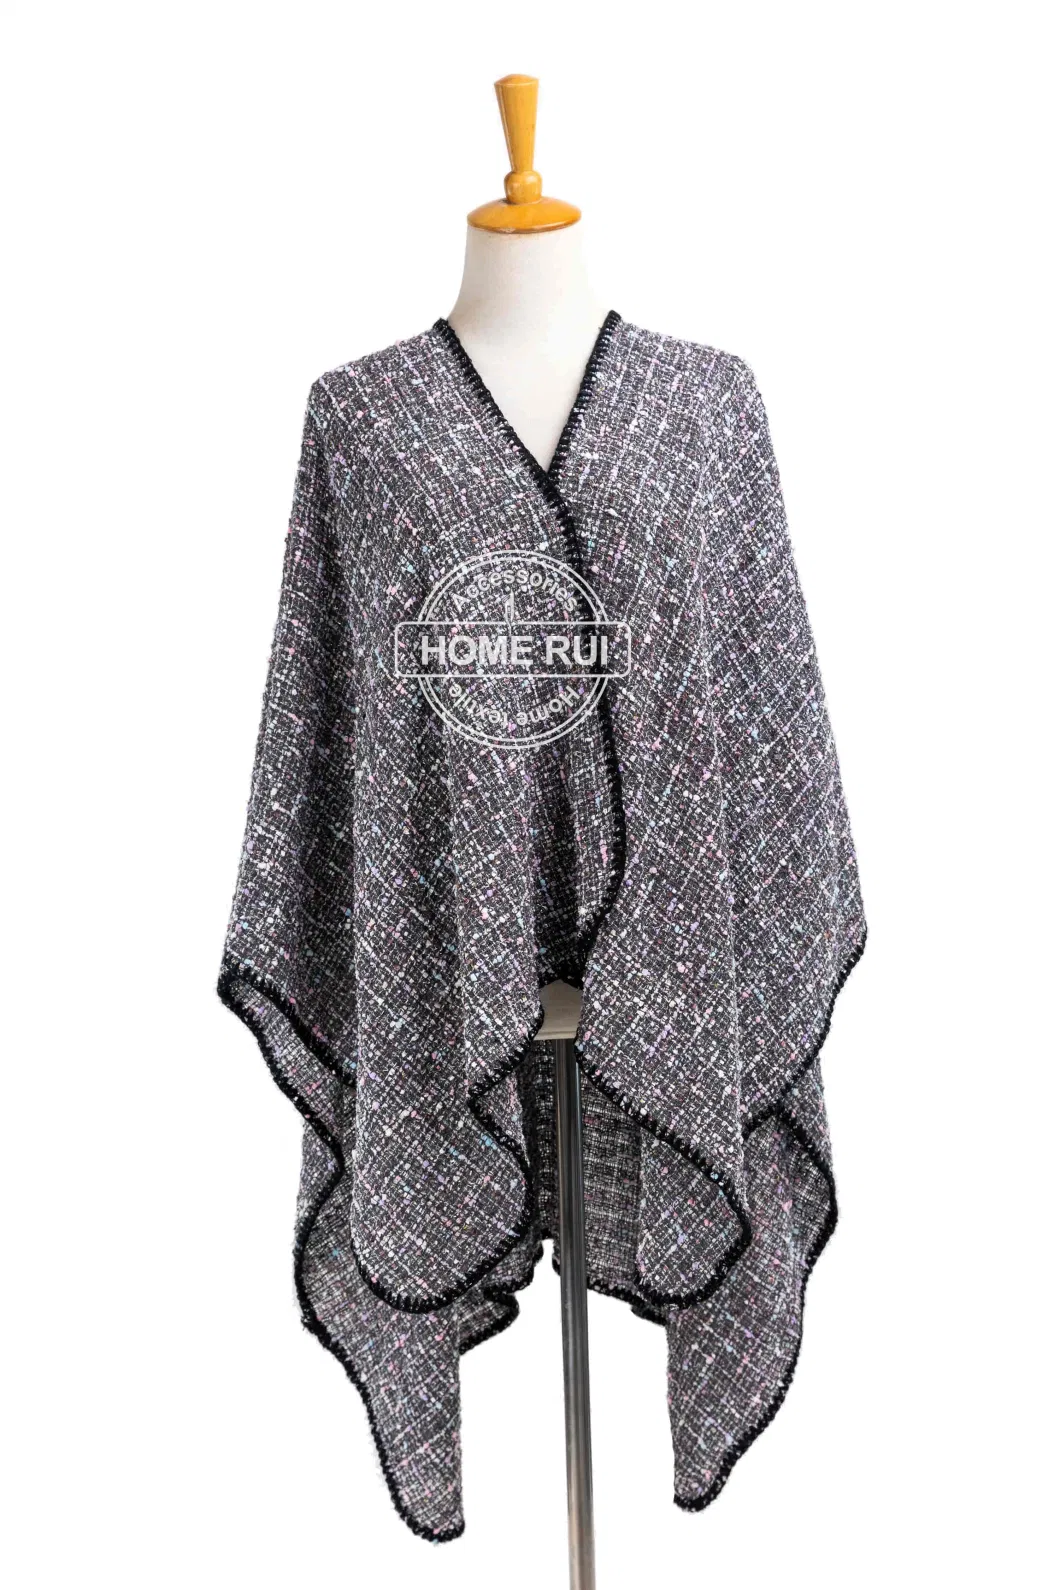 Outfit Fall Winter Female Lady Fashion Black Plus Batwing Sleeve Tassel Cozy Fluffy Chunky Color Dots Sweater Boat V-Neck Oversize Shawl Blanket Poncho Pallium